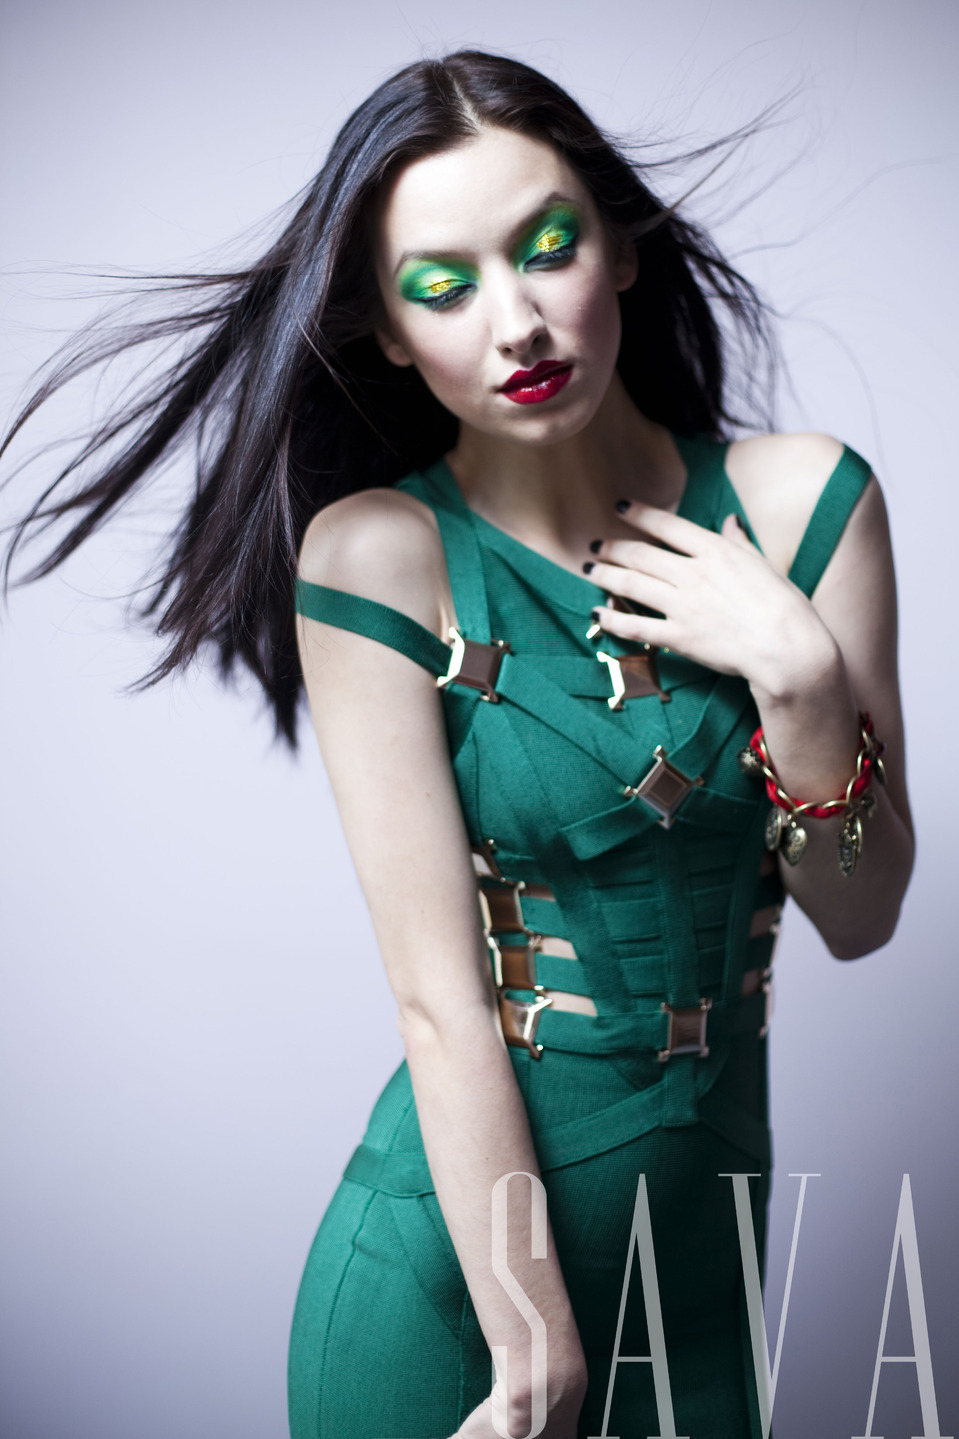 Green fitting dress and make-up | green dress, green make-up, red lipstick